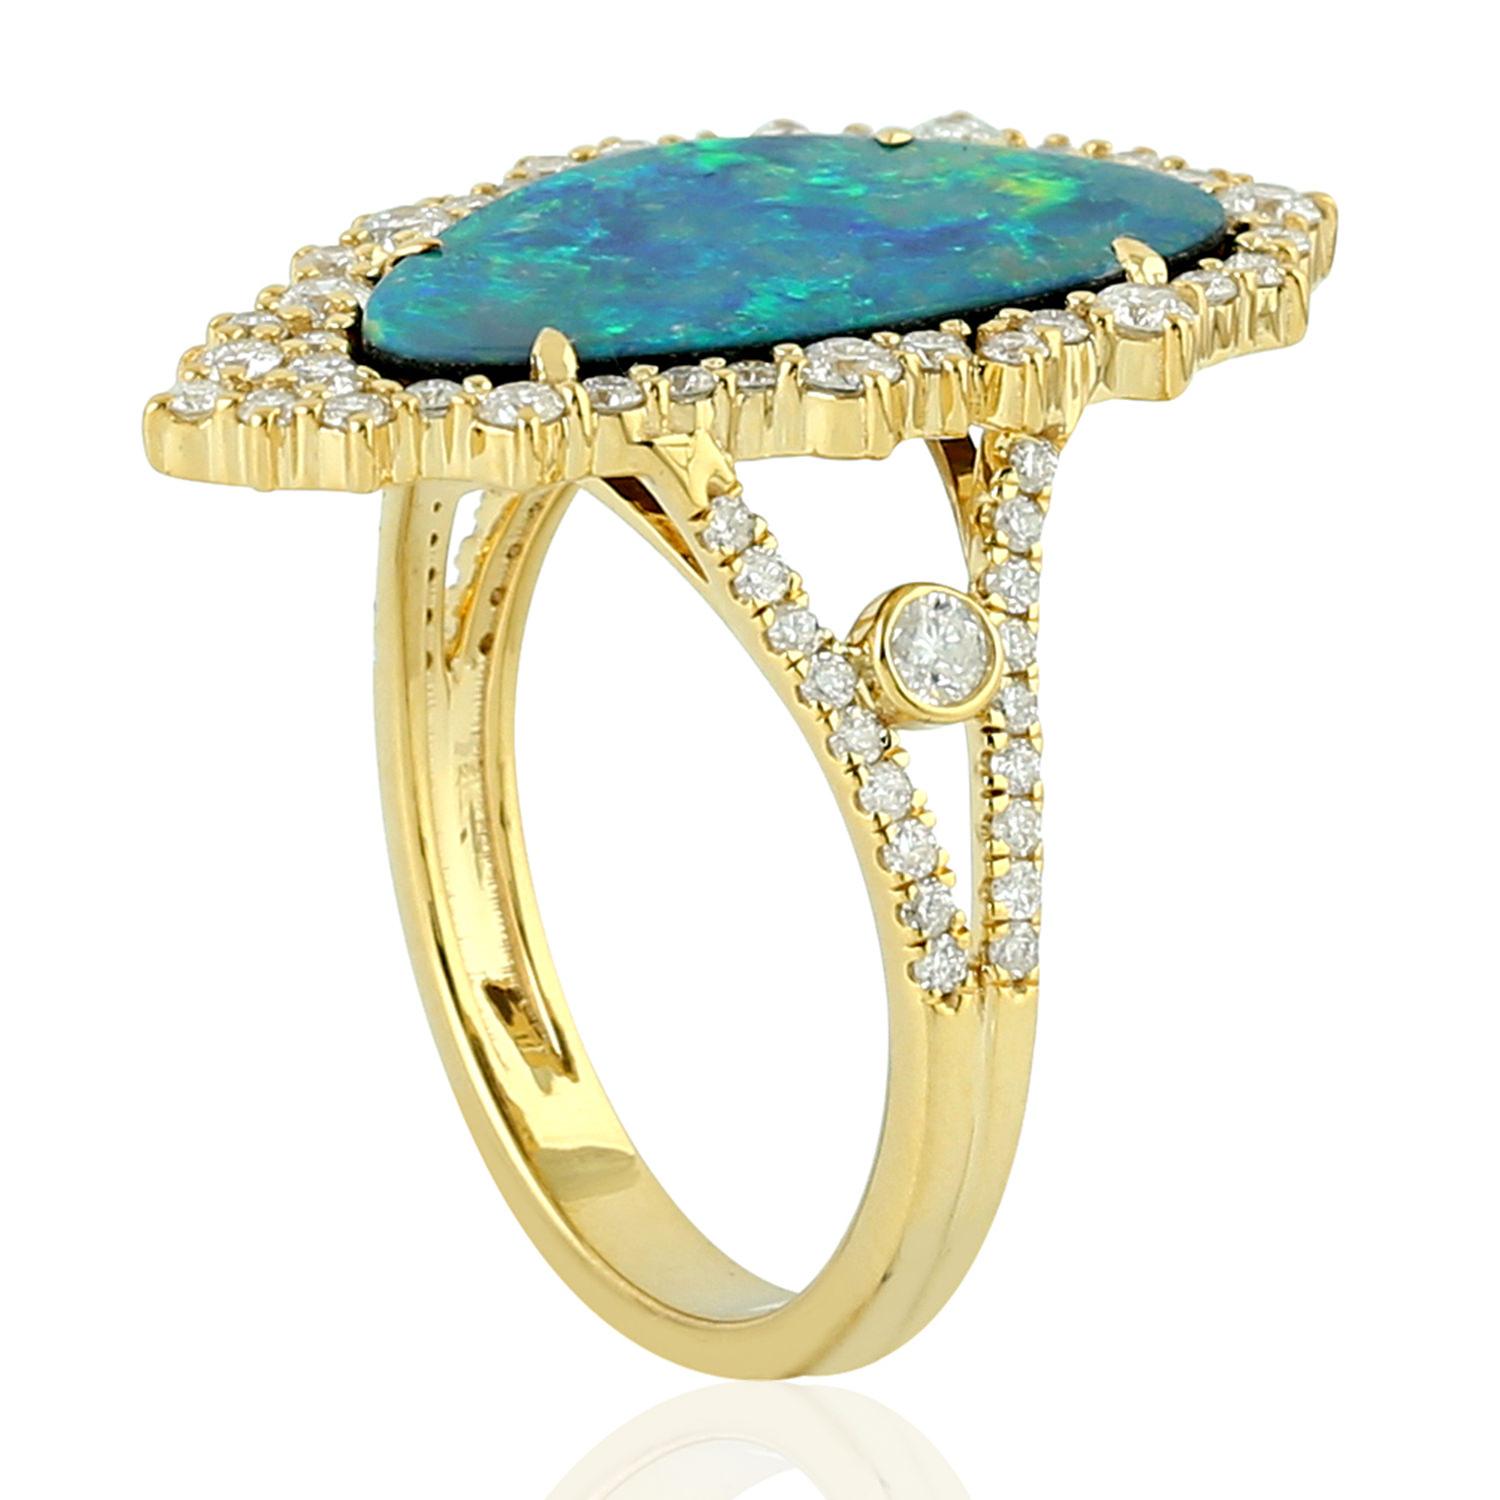 Stunning Opal and Diamond Ring in 18k Yellow Gold can be wore during any day or night time occasion.

Ring Size: US-7

18KT Gold: 4.437gms
Diamond: 0.91cts
Opal: 3.20cts
